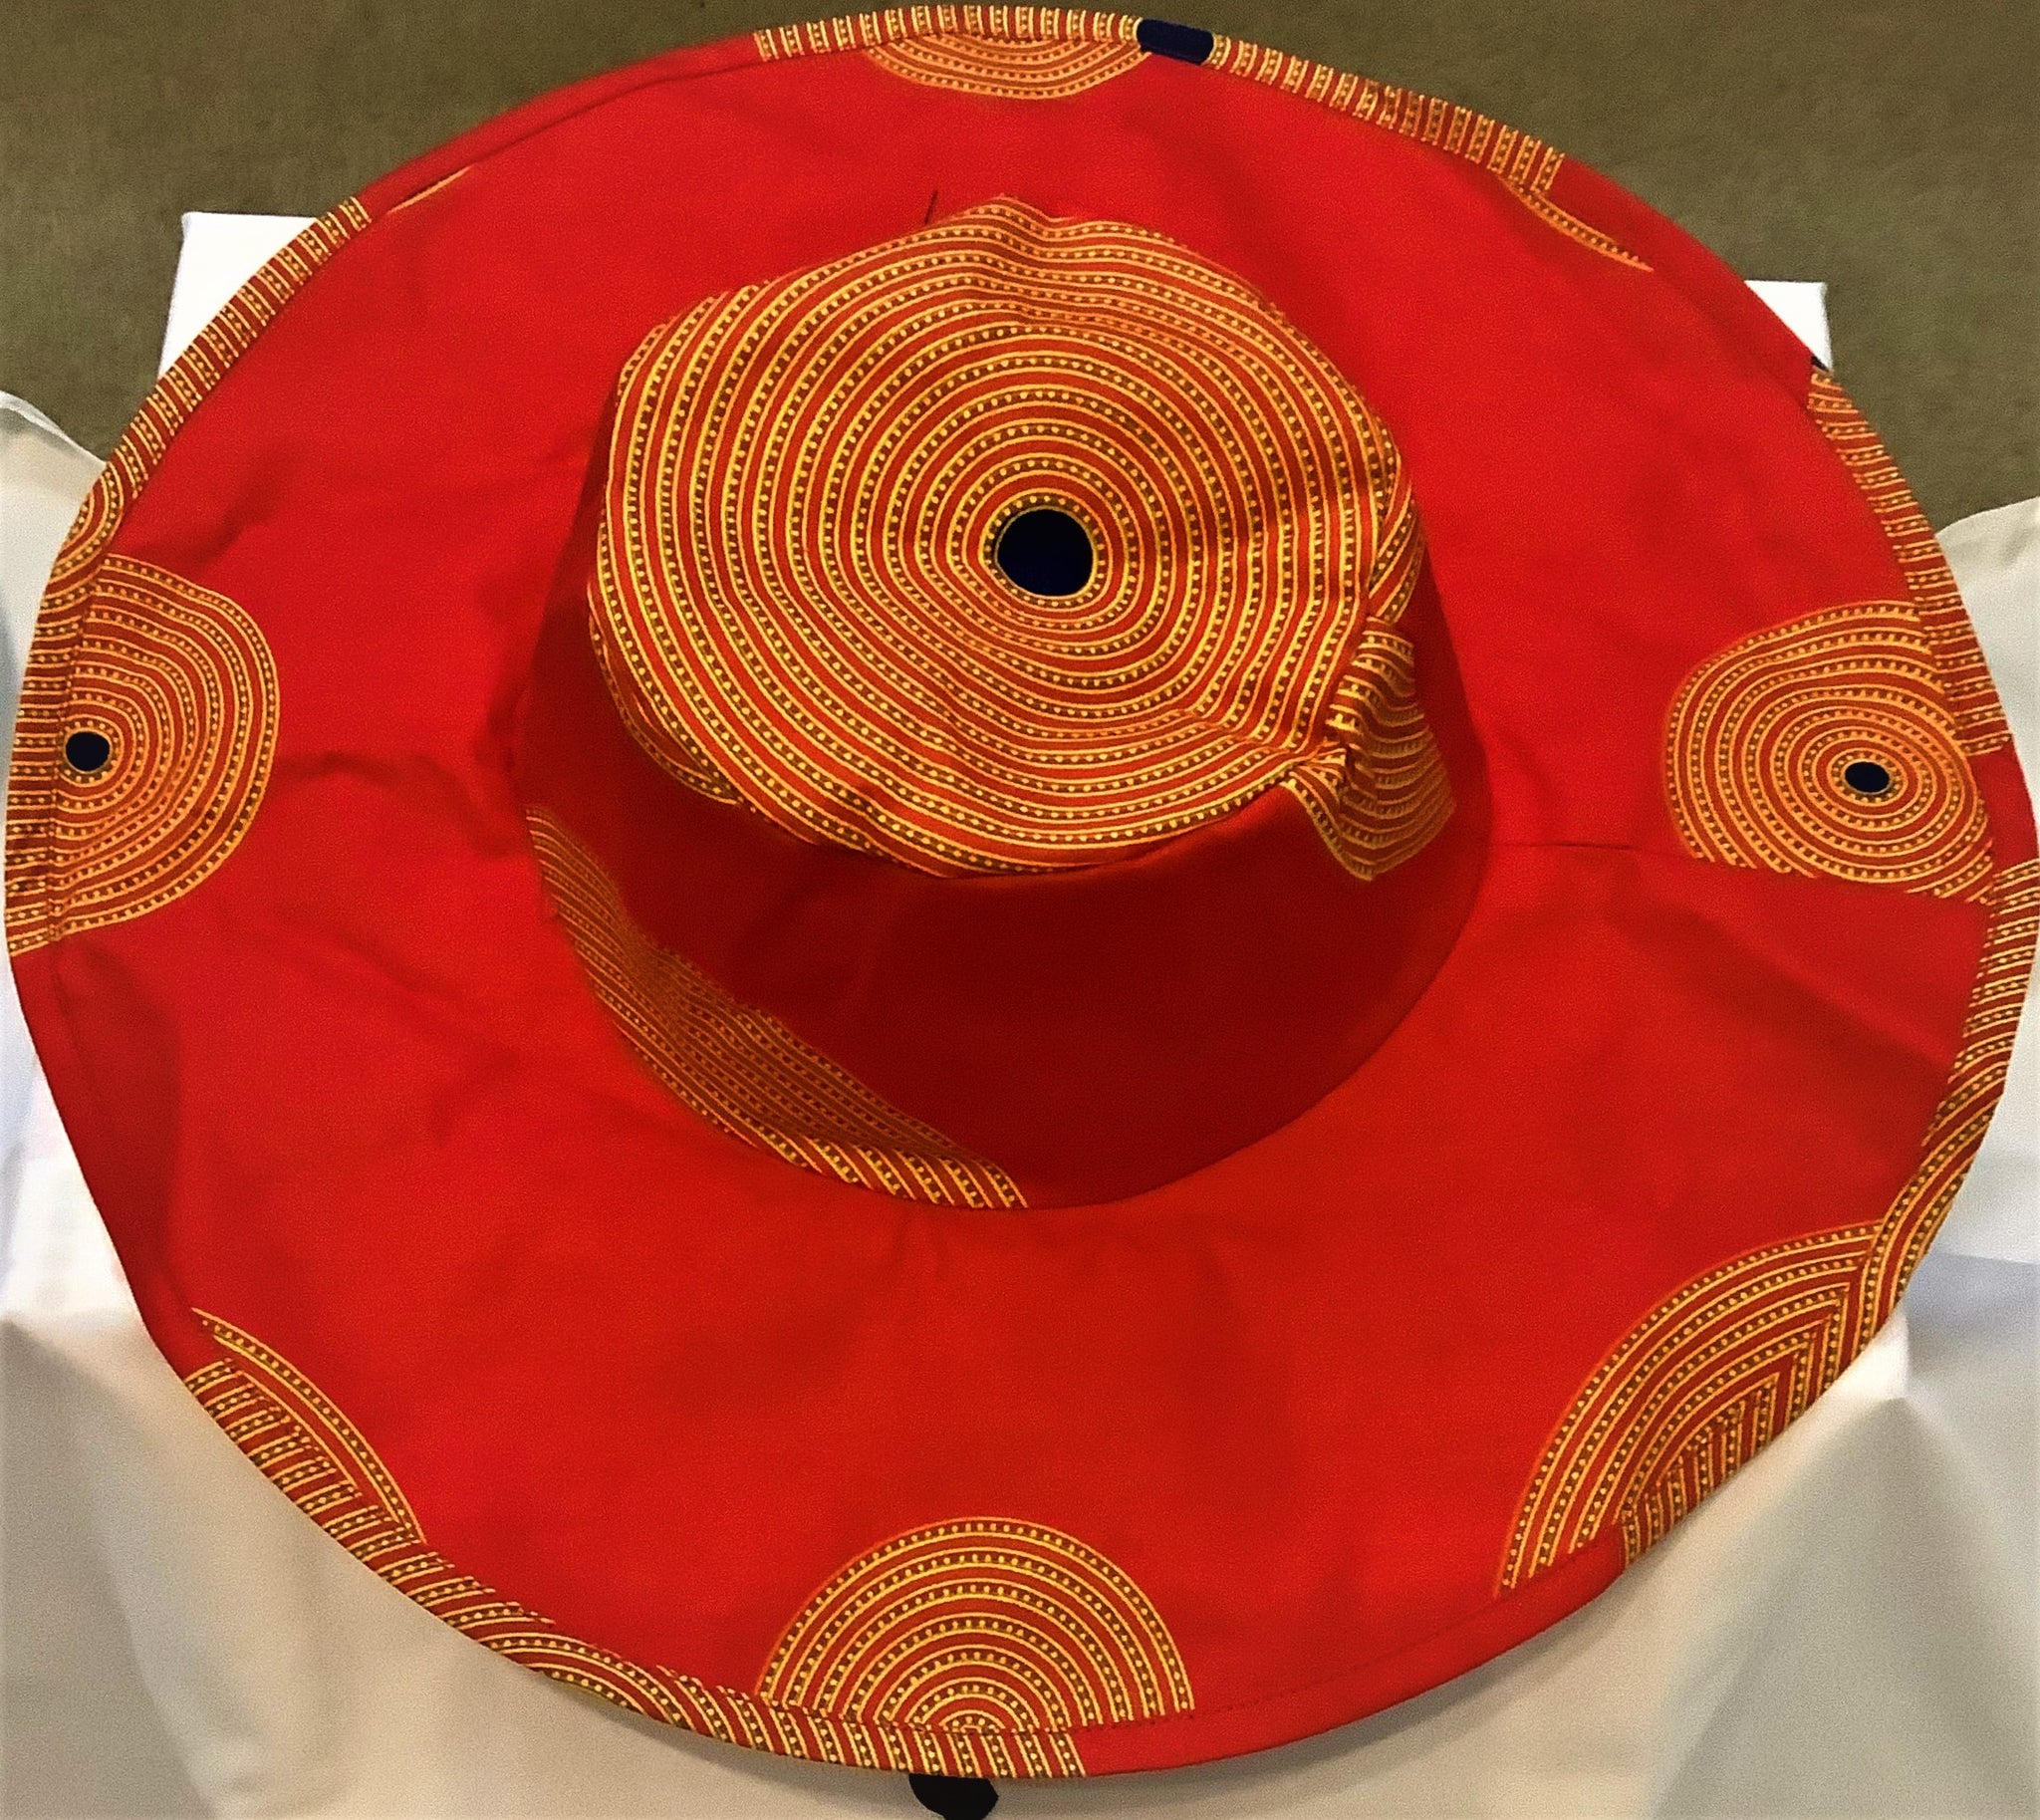 African Style-Floppy Hats in African Waxprint